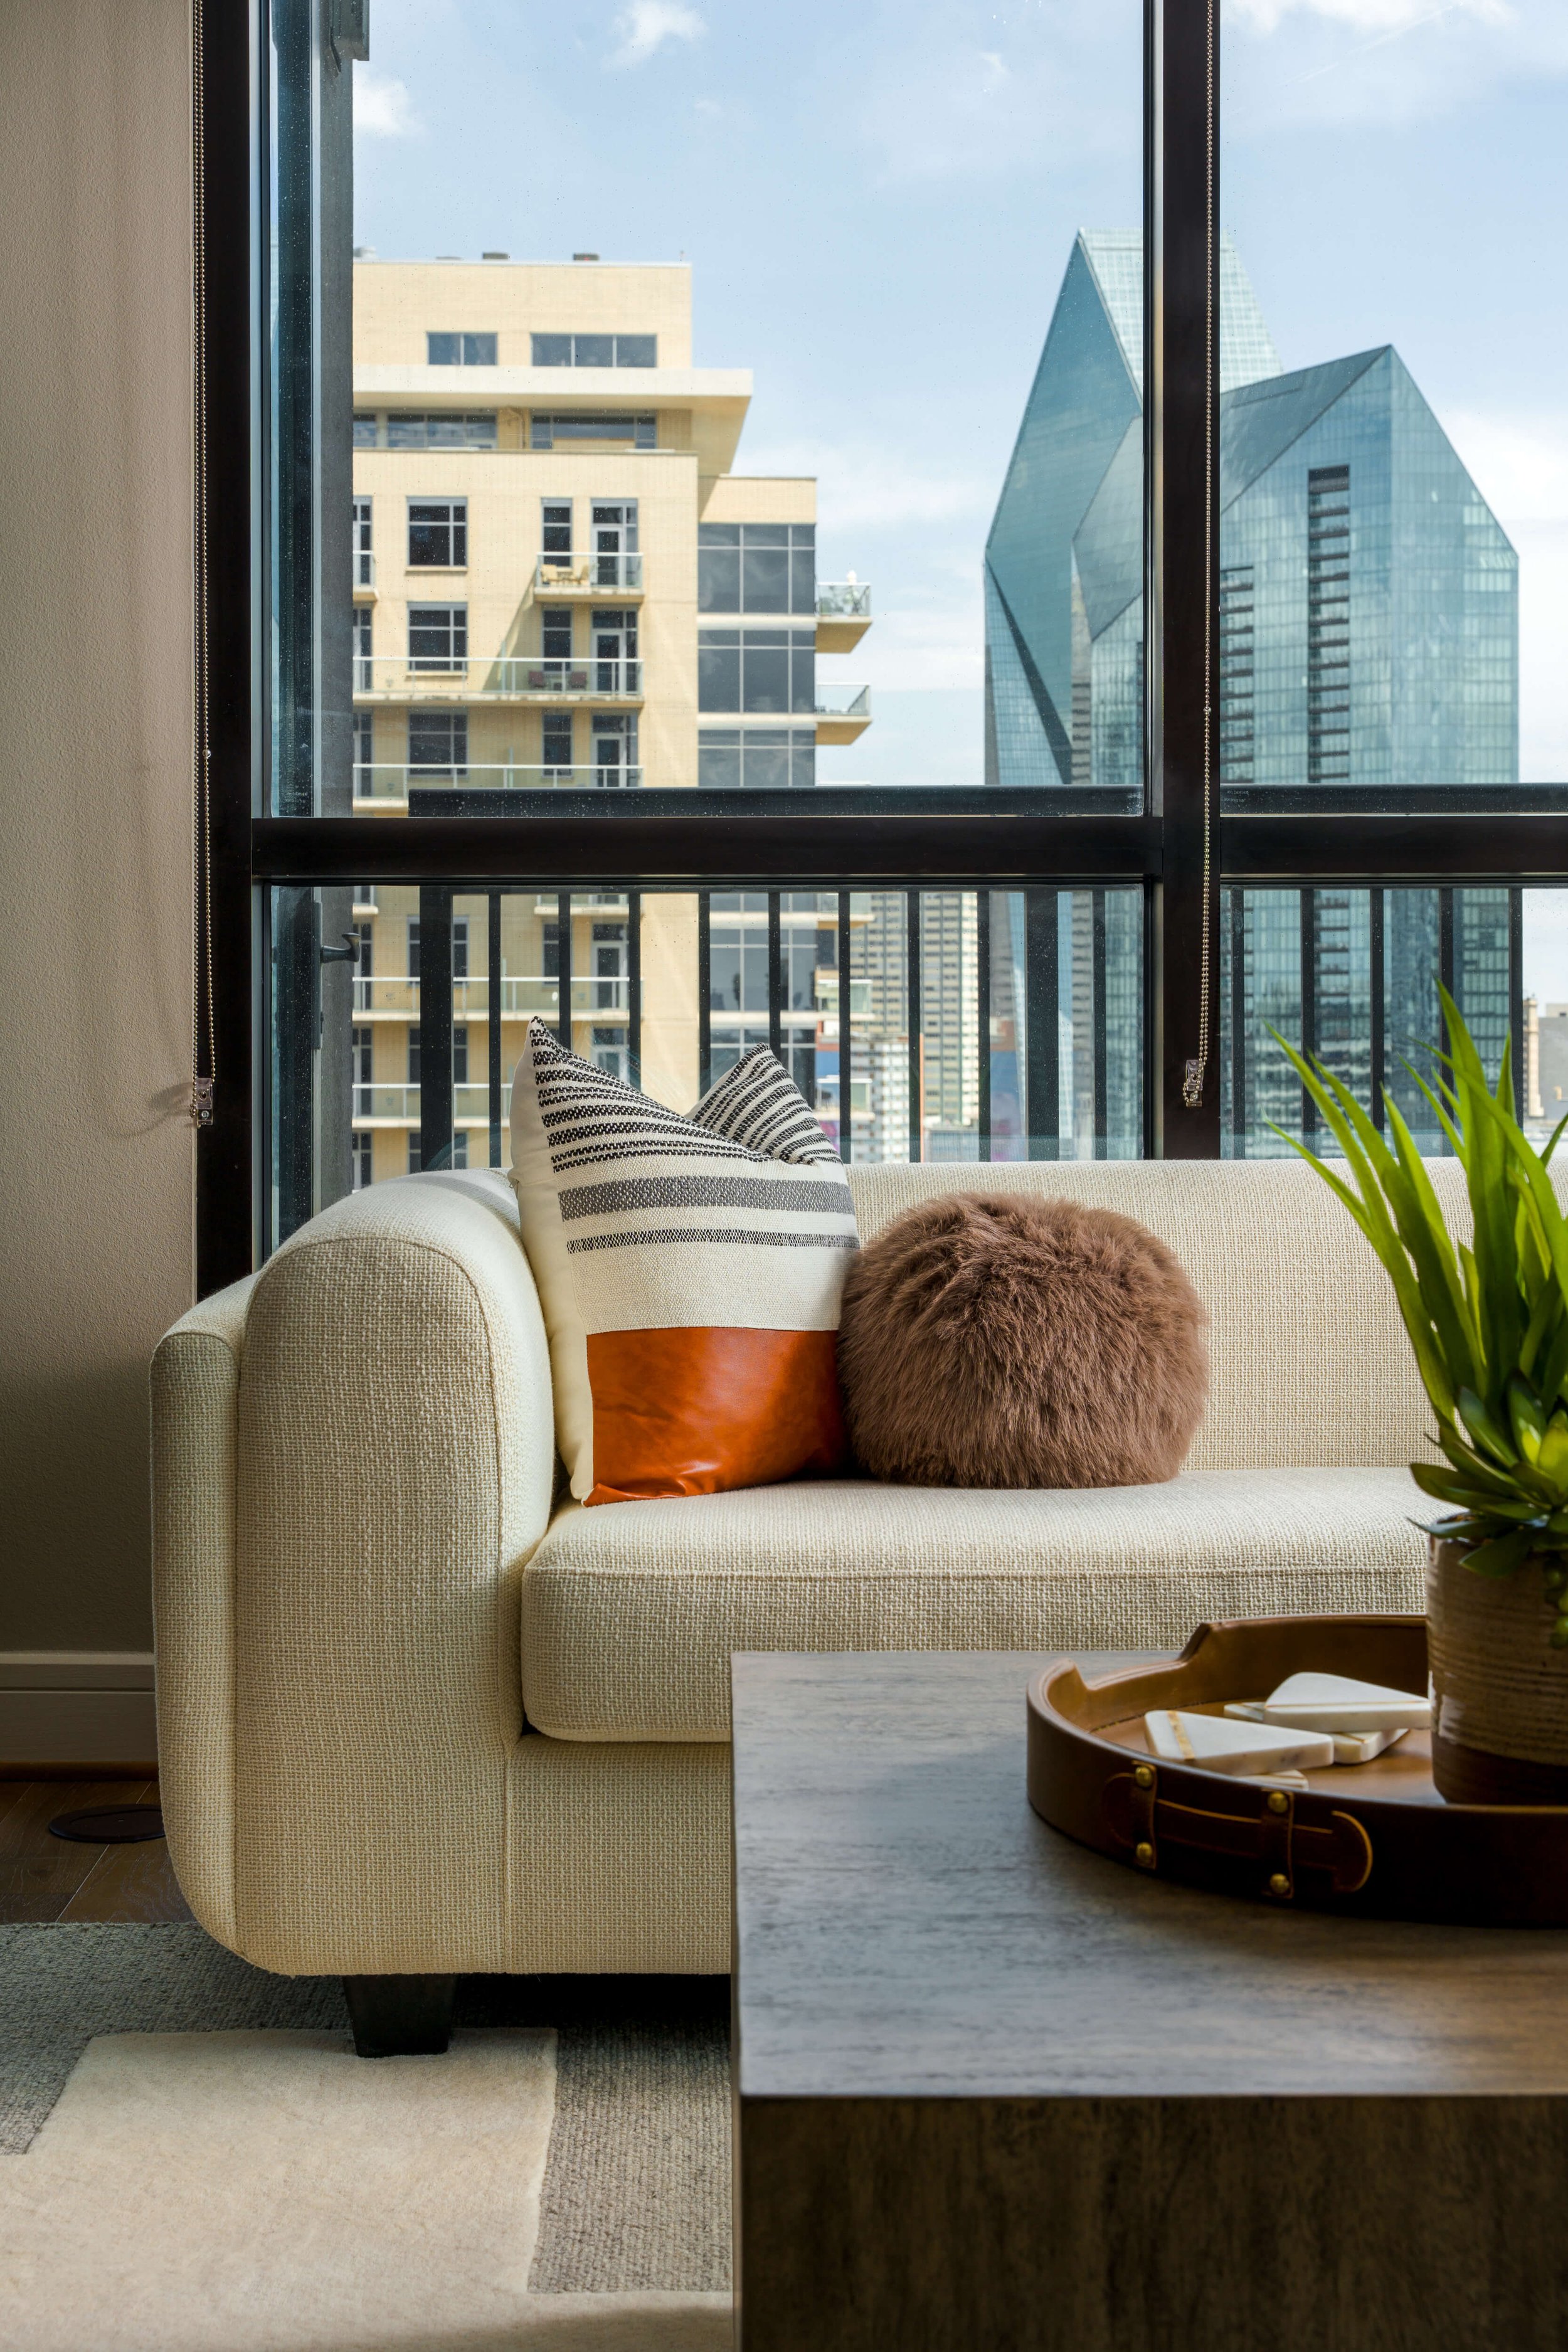 This modern high rise apartment designed by Travis Pernell Interiors features views in every direction, a cream colored sofa, textured orange and tan pillows, and a cognac leather coffee table tray. 